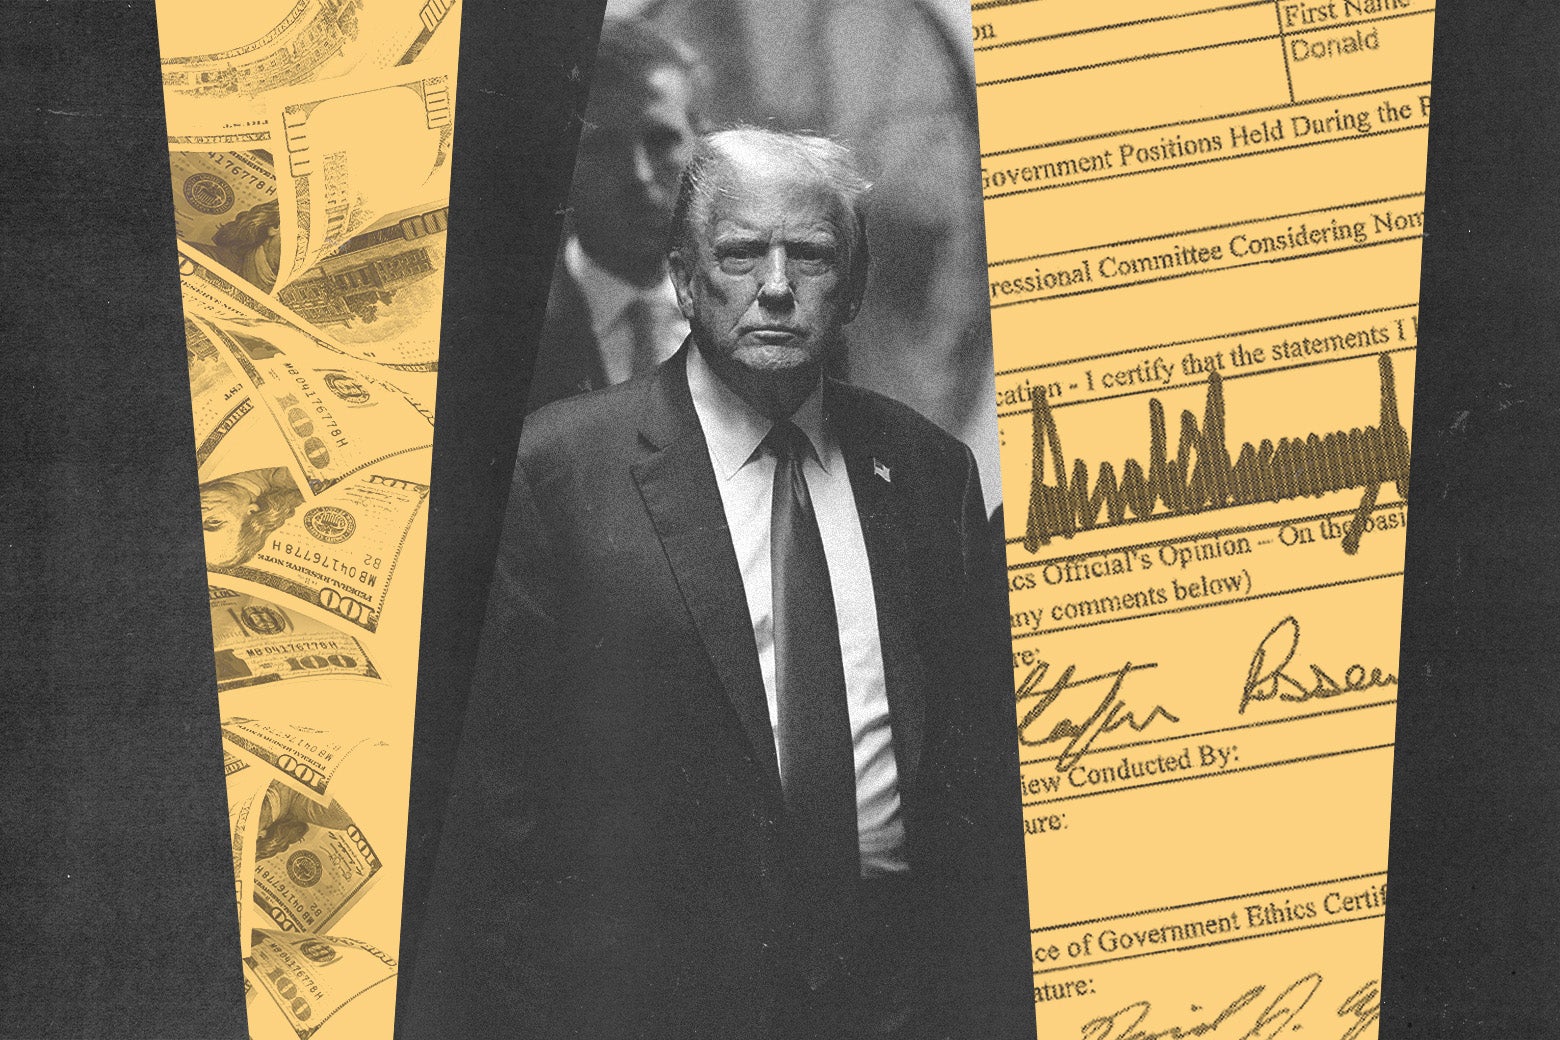 A photo collage of Trump, some dollar bills, and a document with his signature.